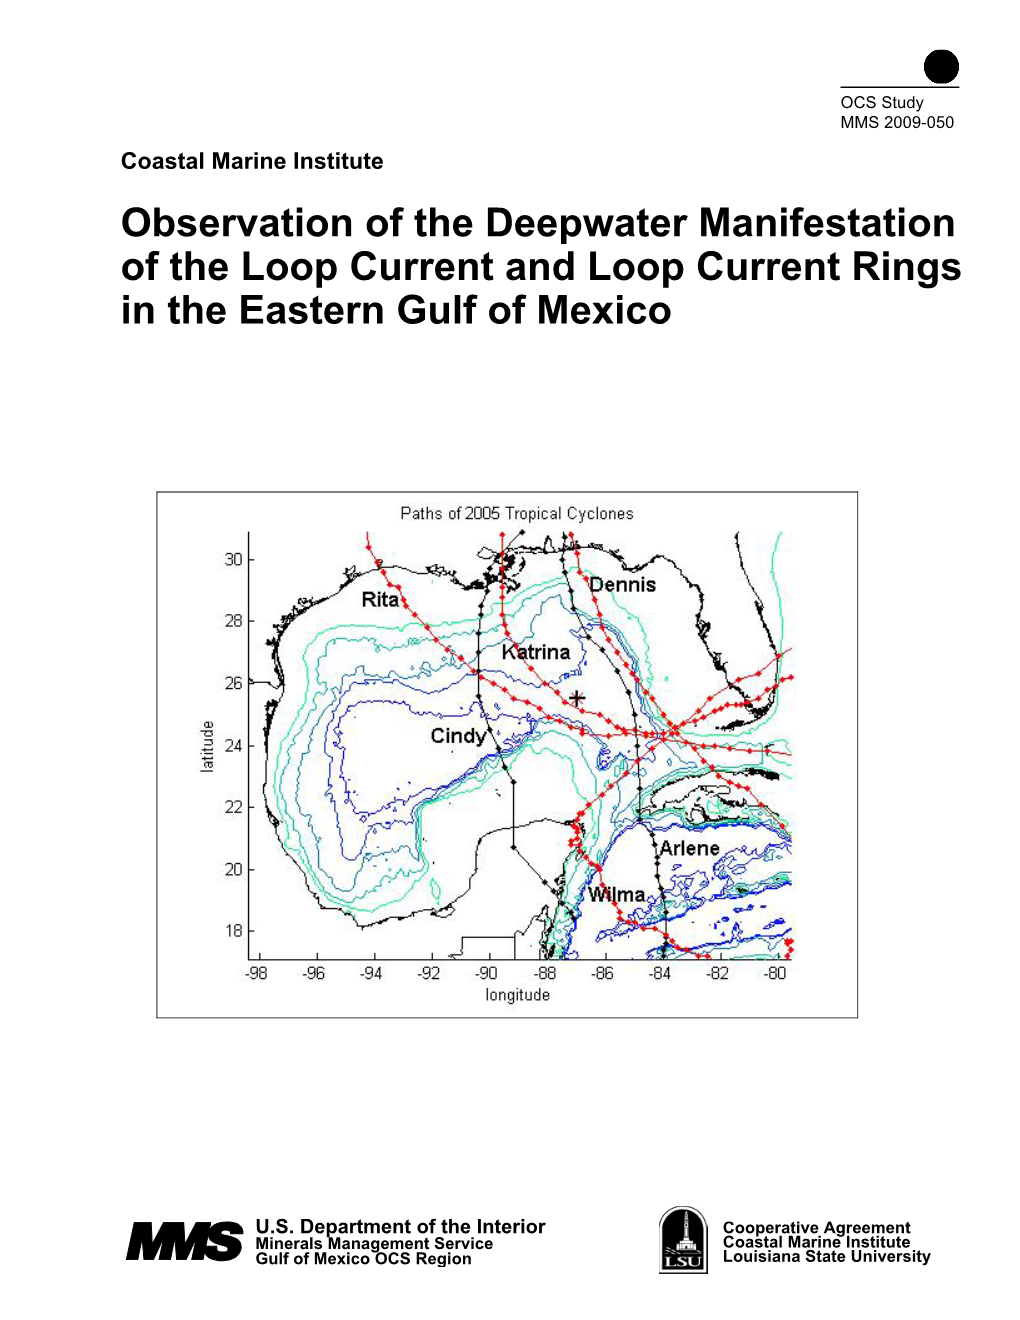 Observation of the Deepwater Manifestation of the Loop Current and Loop Current Rings in the Eastern Gulf of Mexico